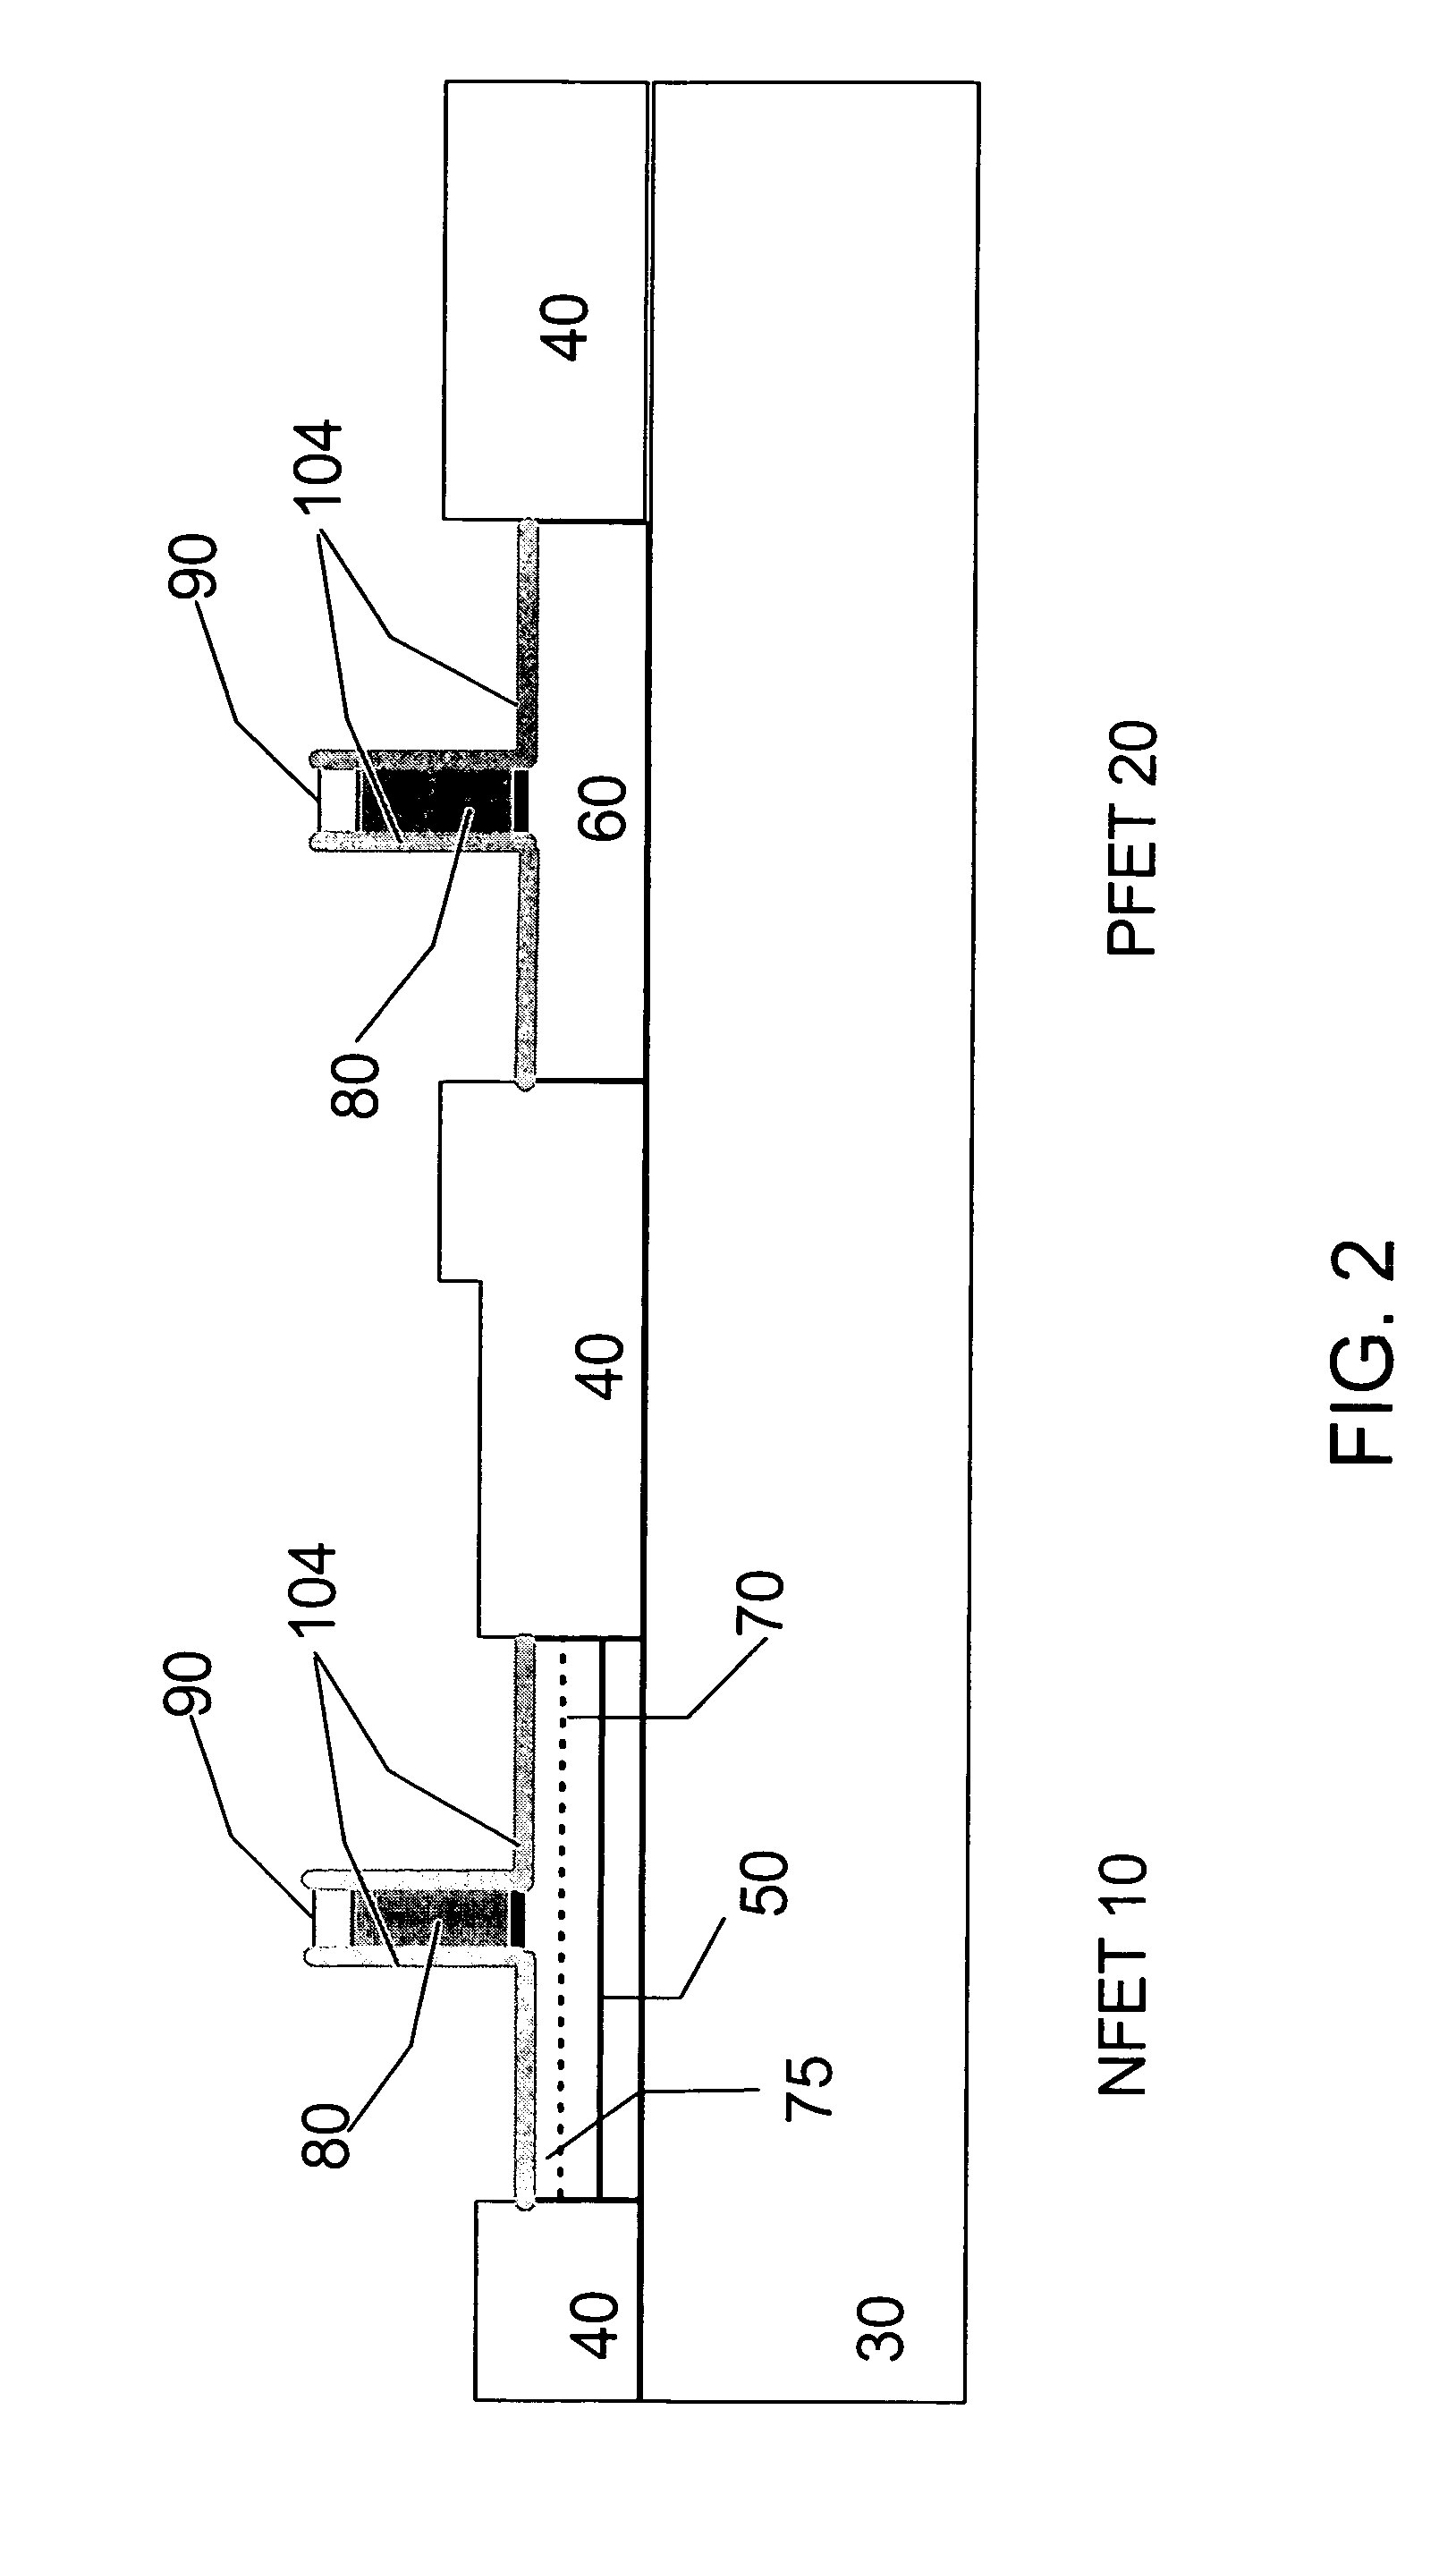 Pseudomorphic Si/SiGe/Si body device with embedded SiGe source/drain